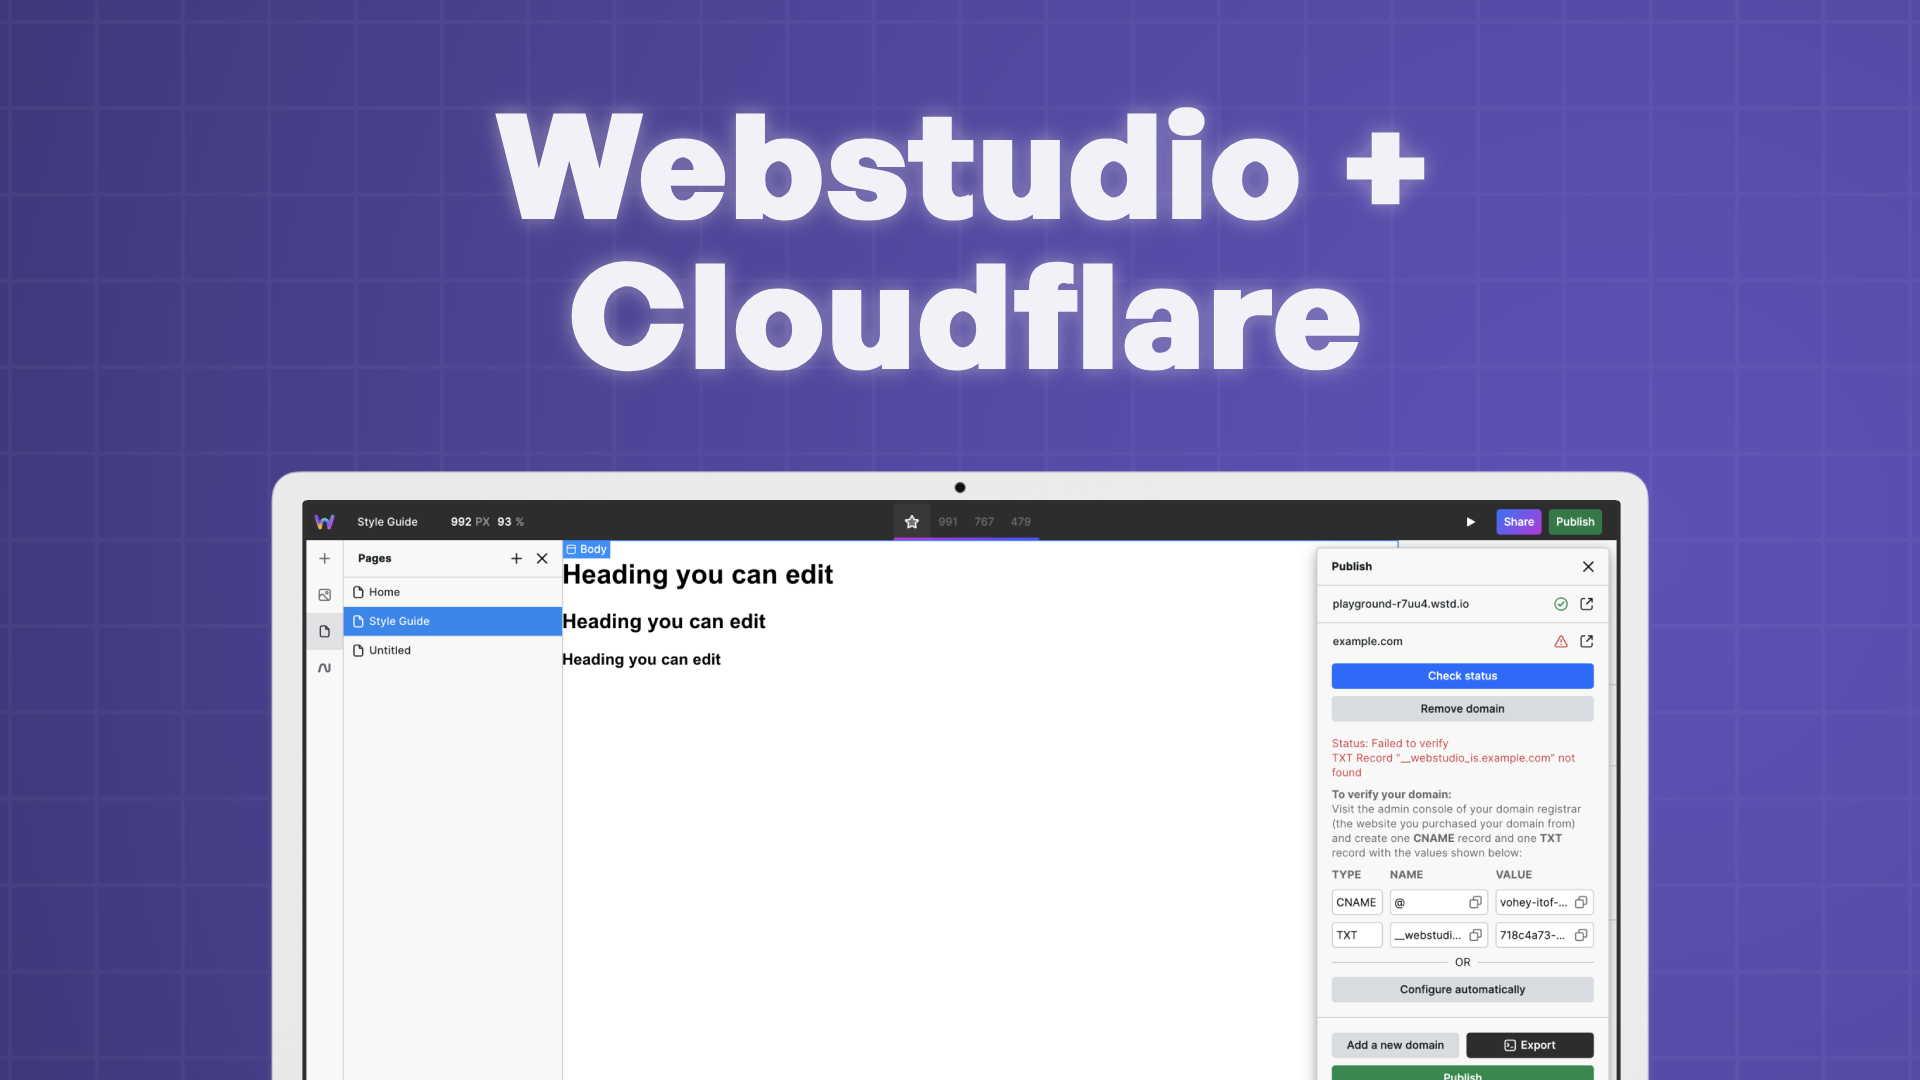 "Webstudio + Cloudflare" with screenshot of the Webstudio DNS settings.